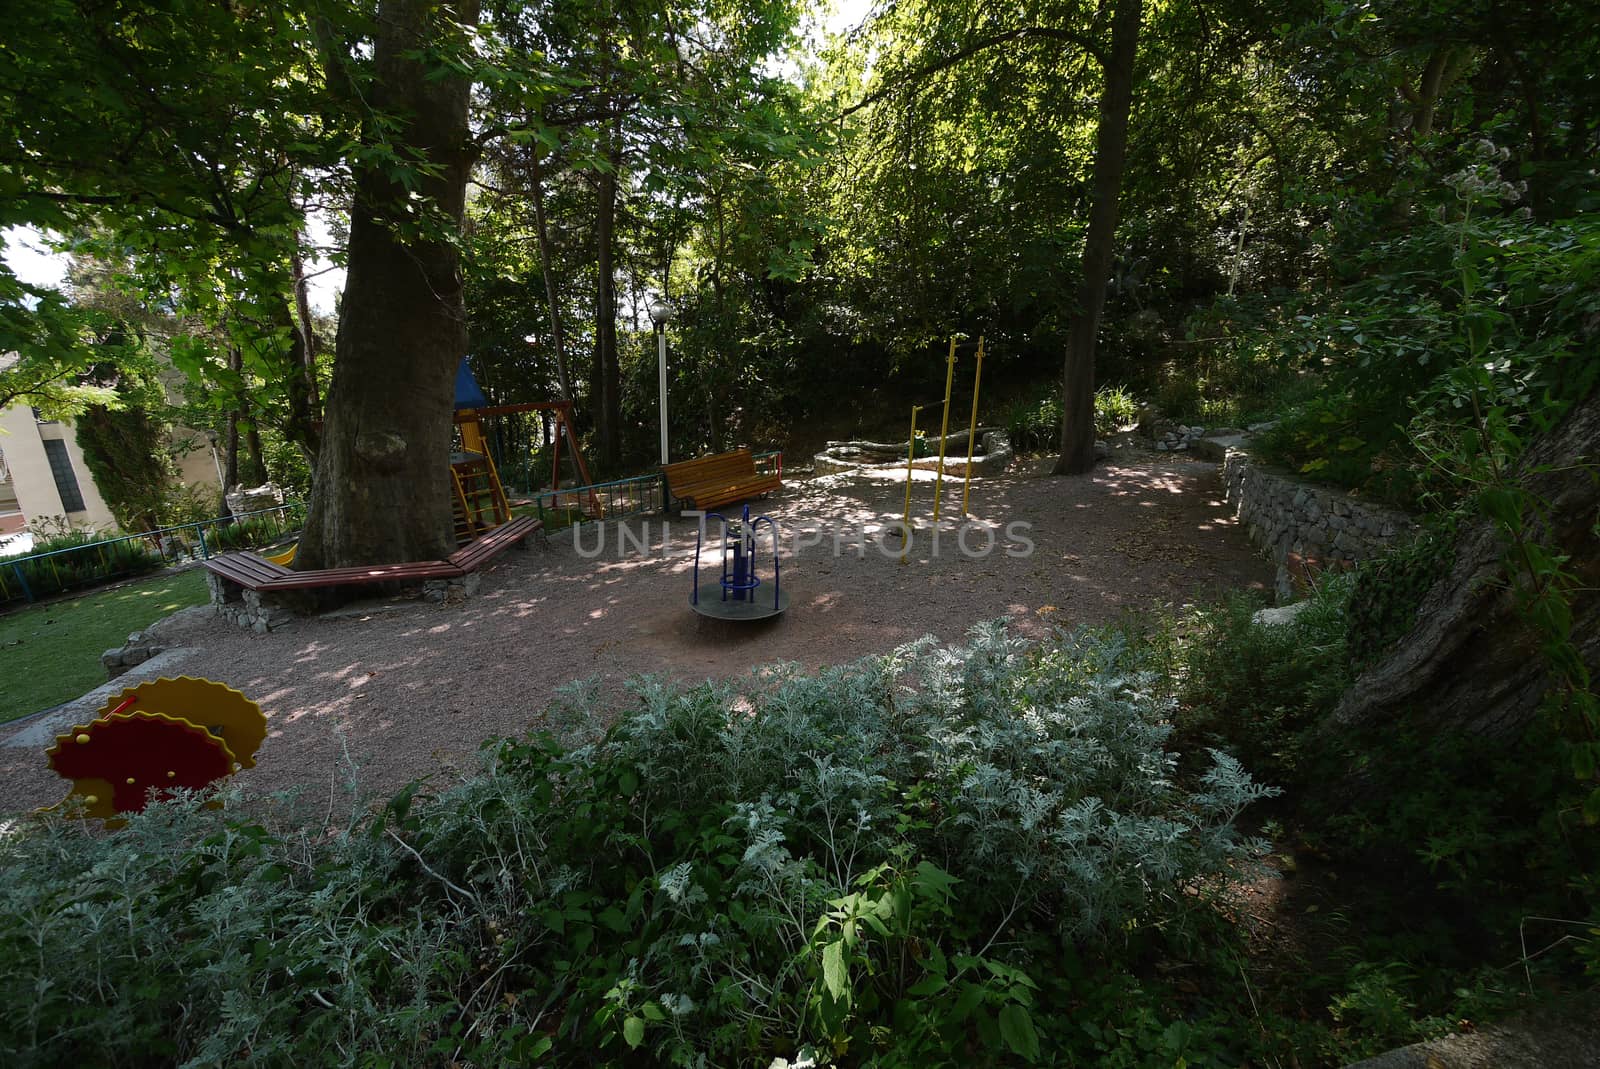 in the shadow of a thick crone of a dense maple there is a children's playground with wooden benches